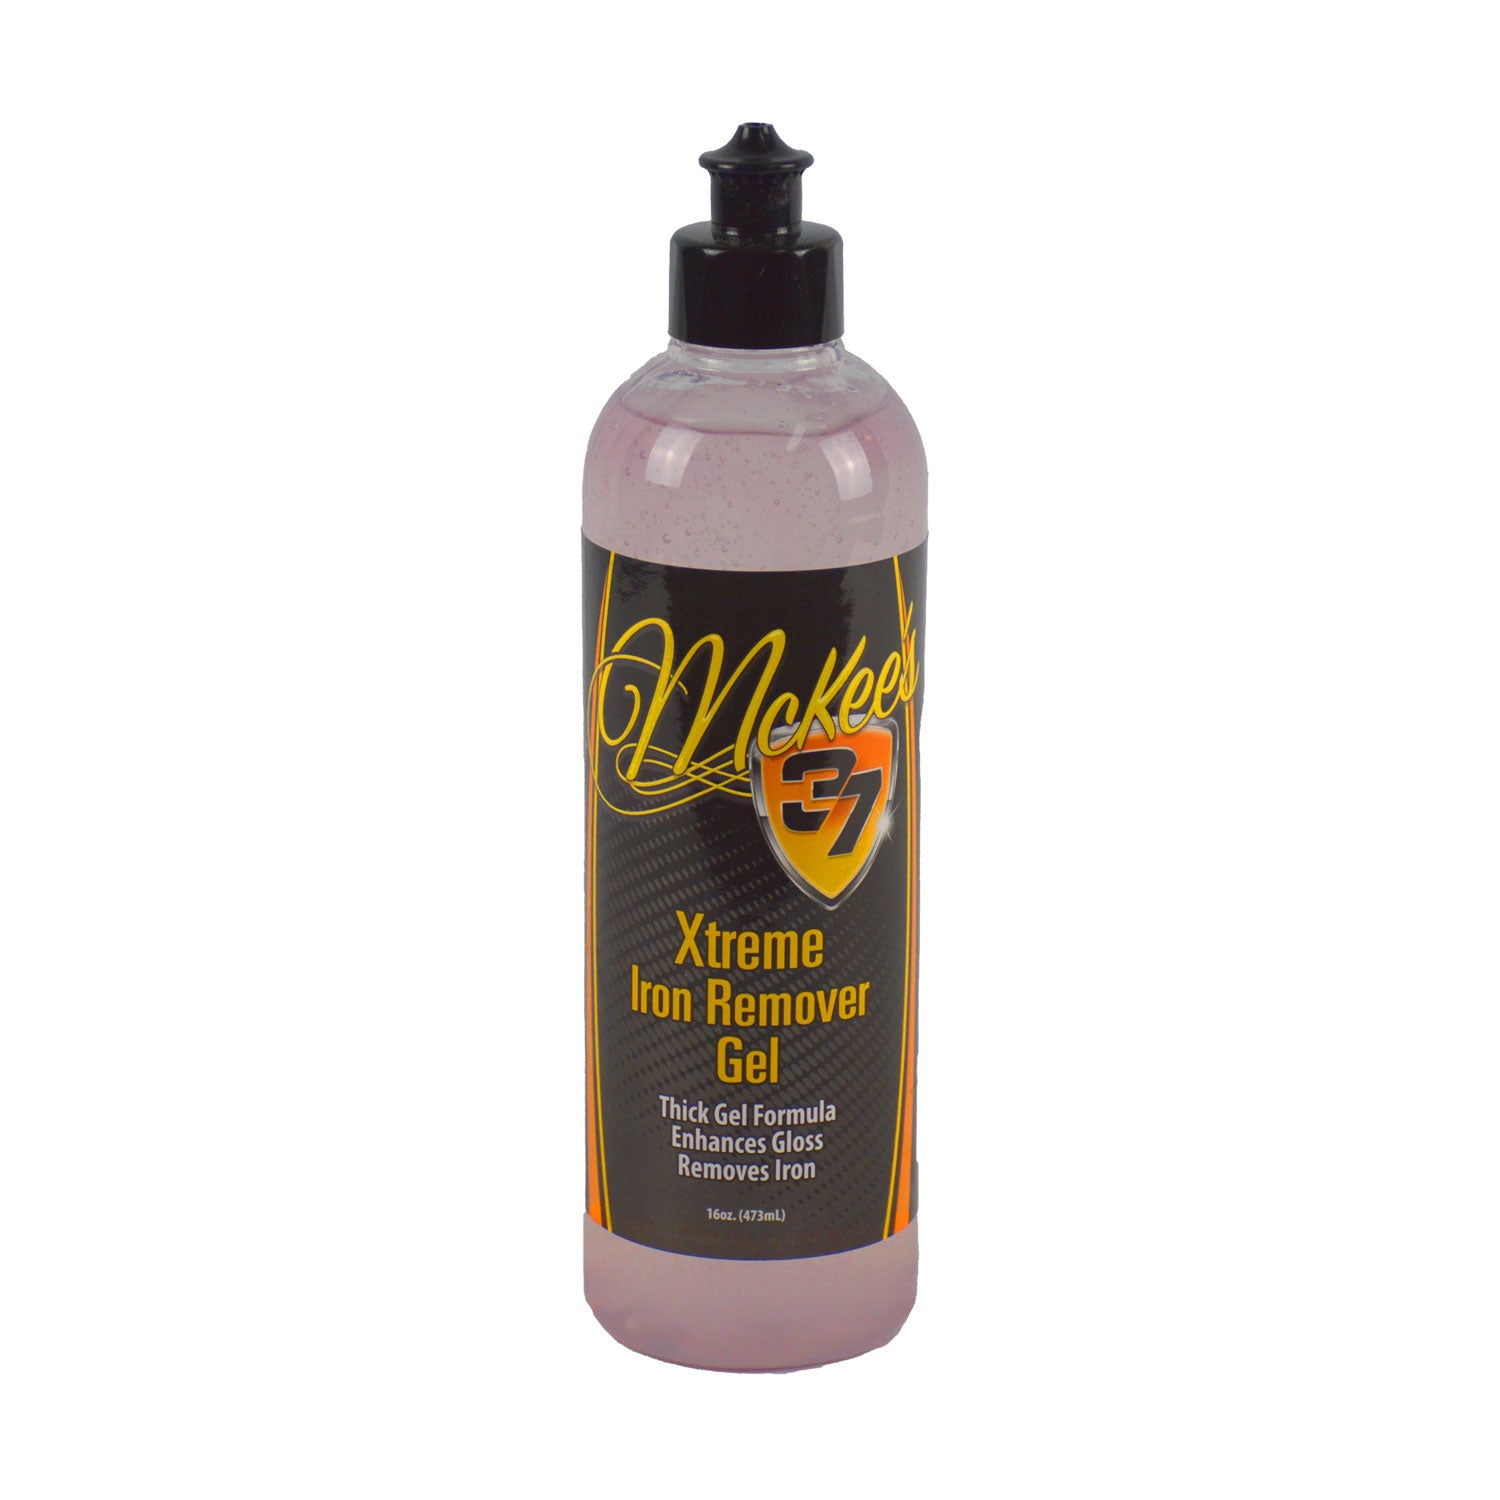 Rust Remover Spray for Pro Car Detailing Iron Remover Rust Spray for Car  Wheels Effective New